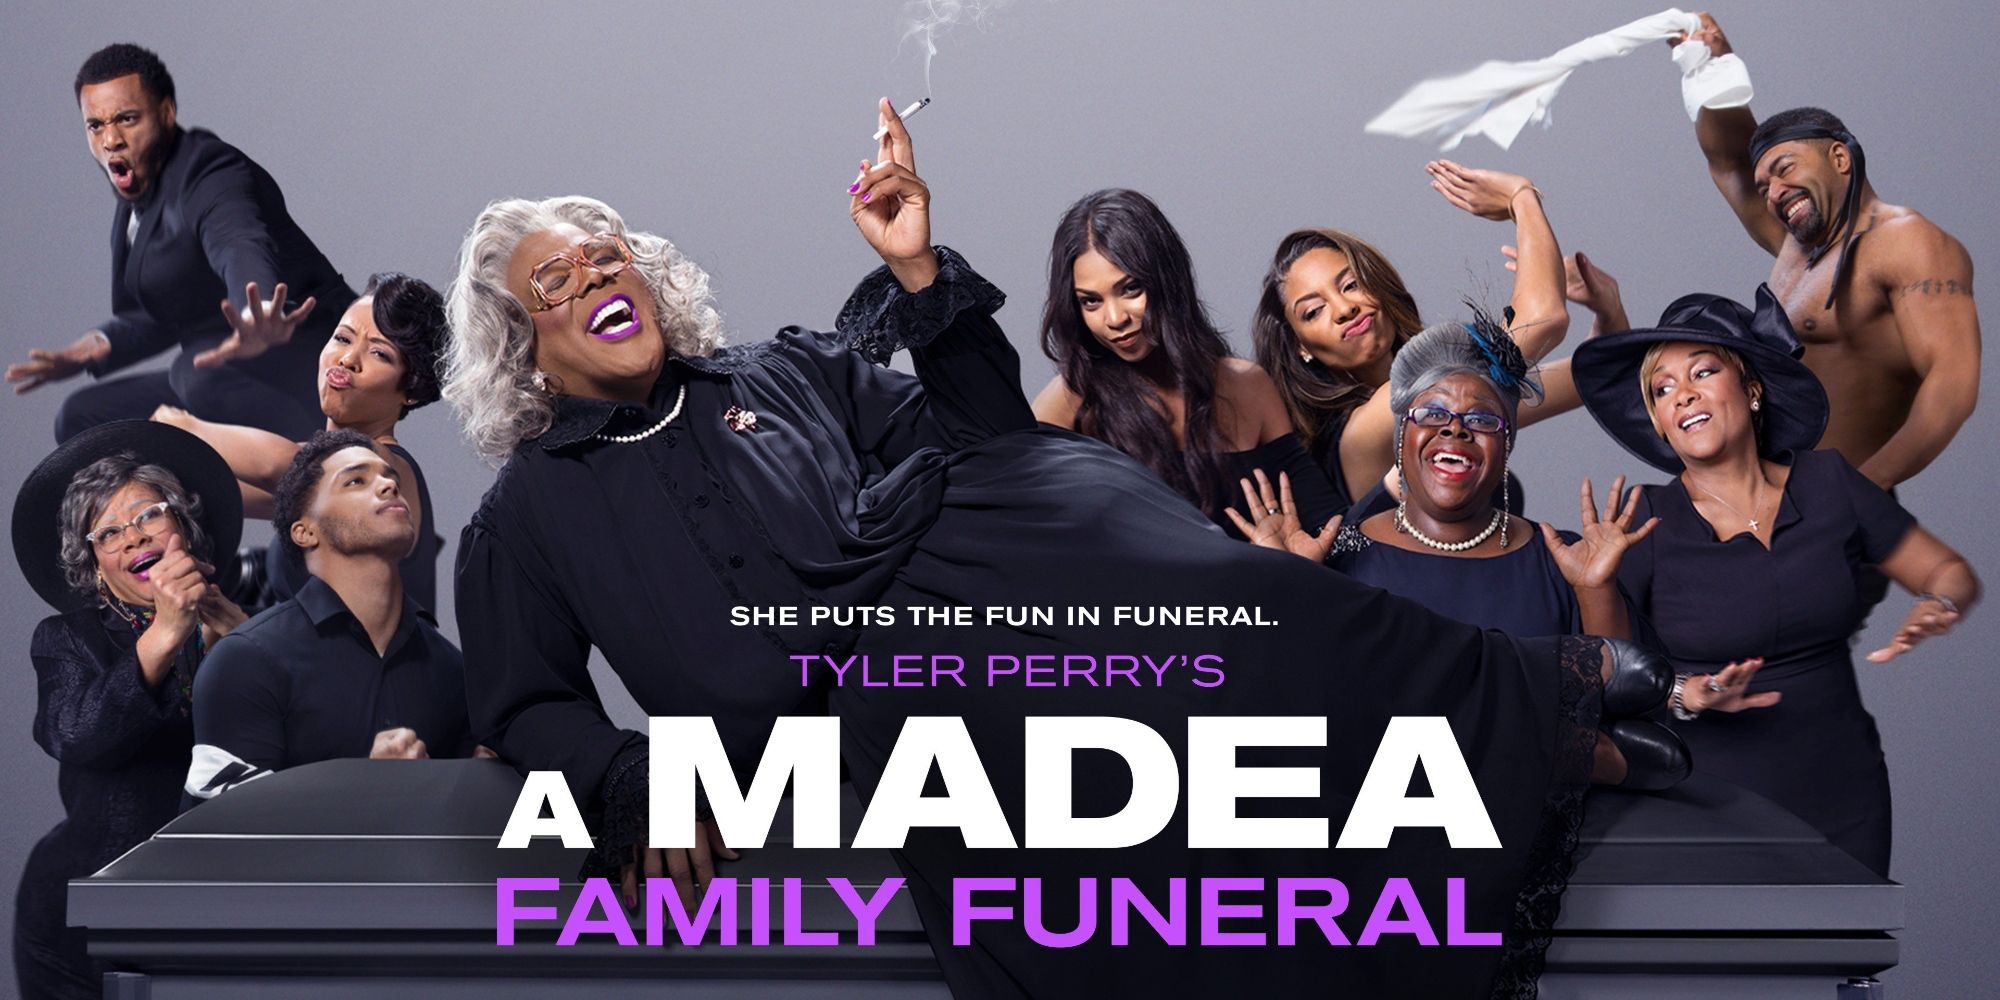 How A Madea Family Funeral Ended The Franchise